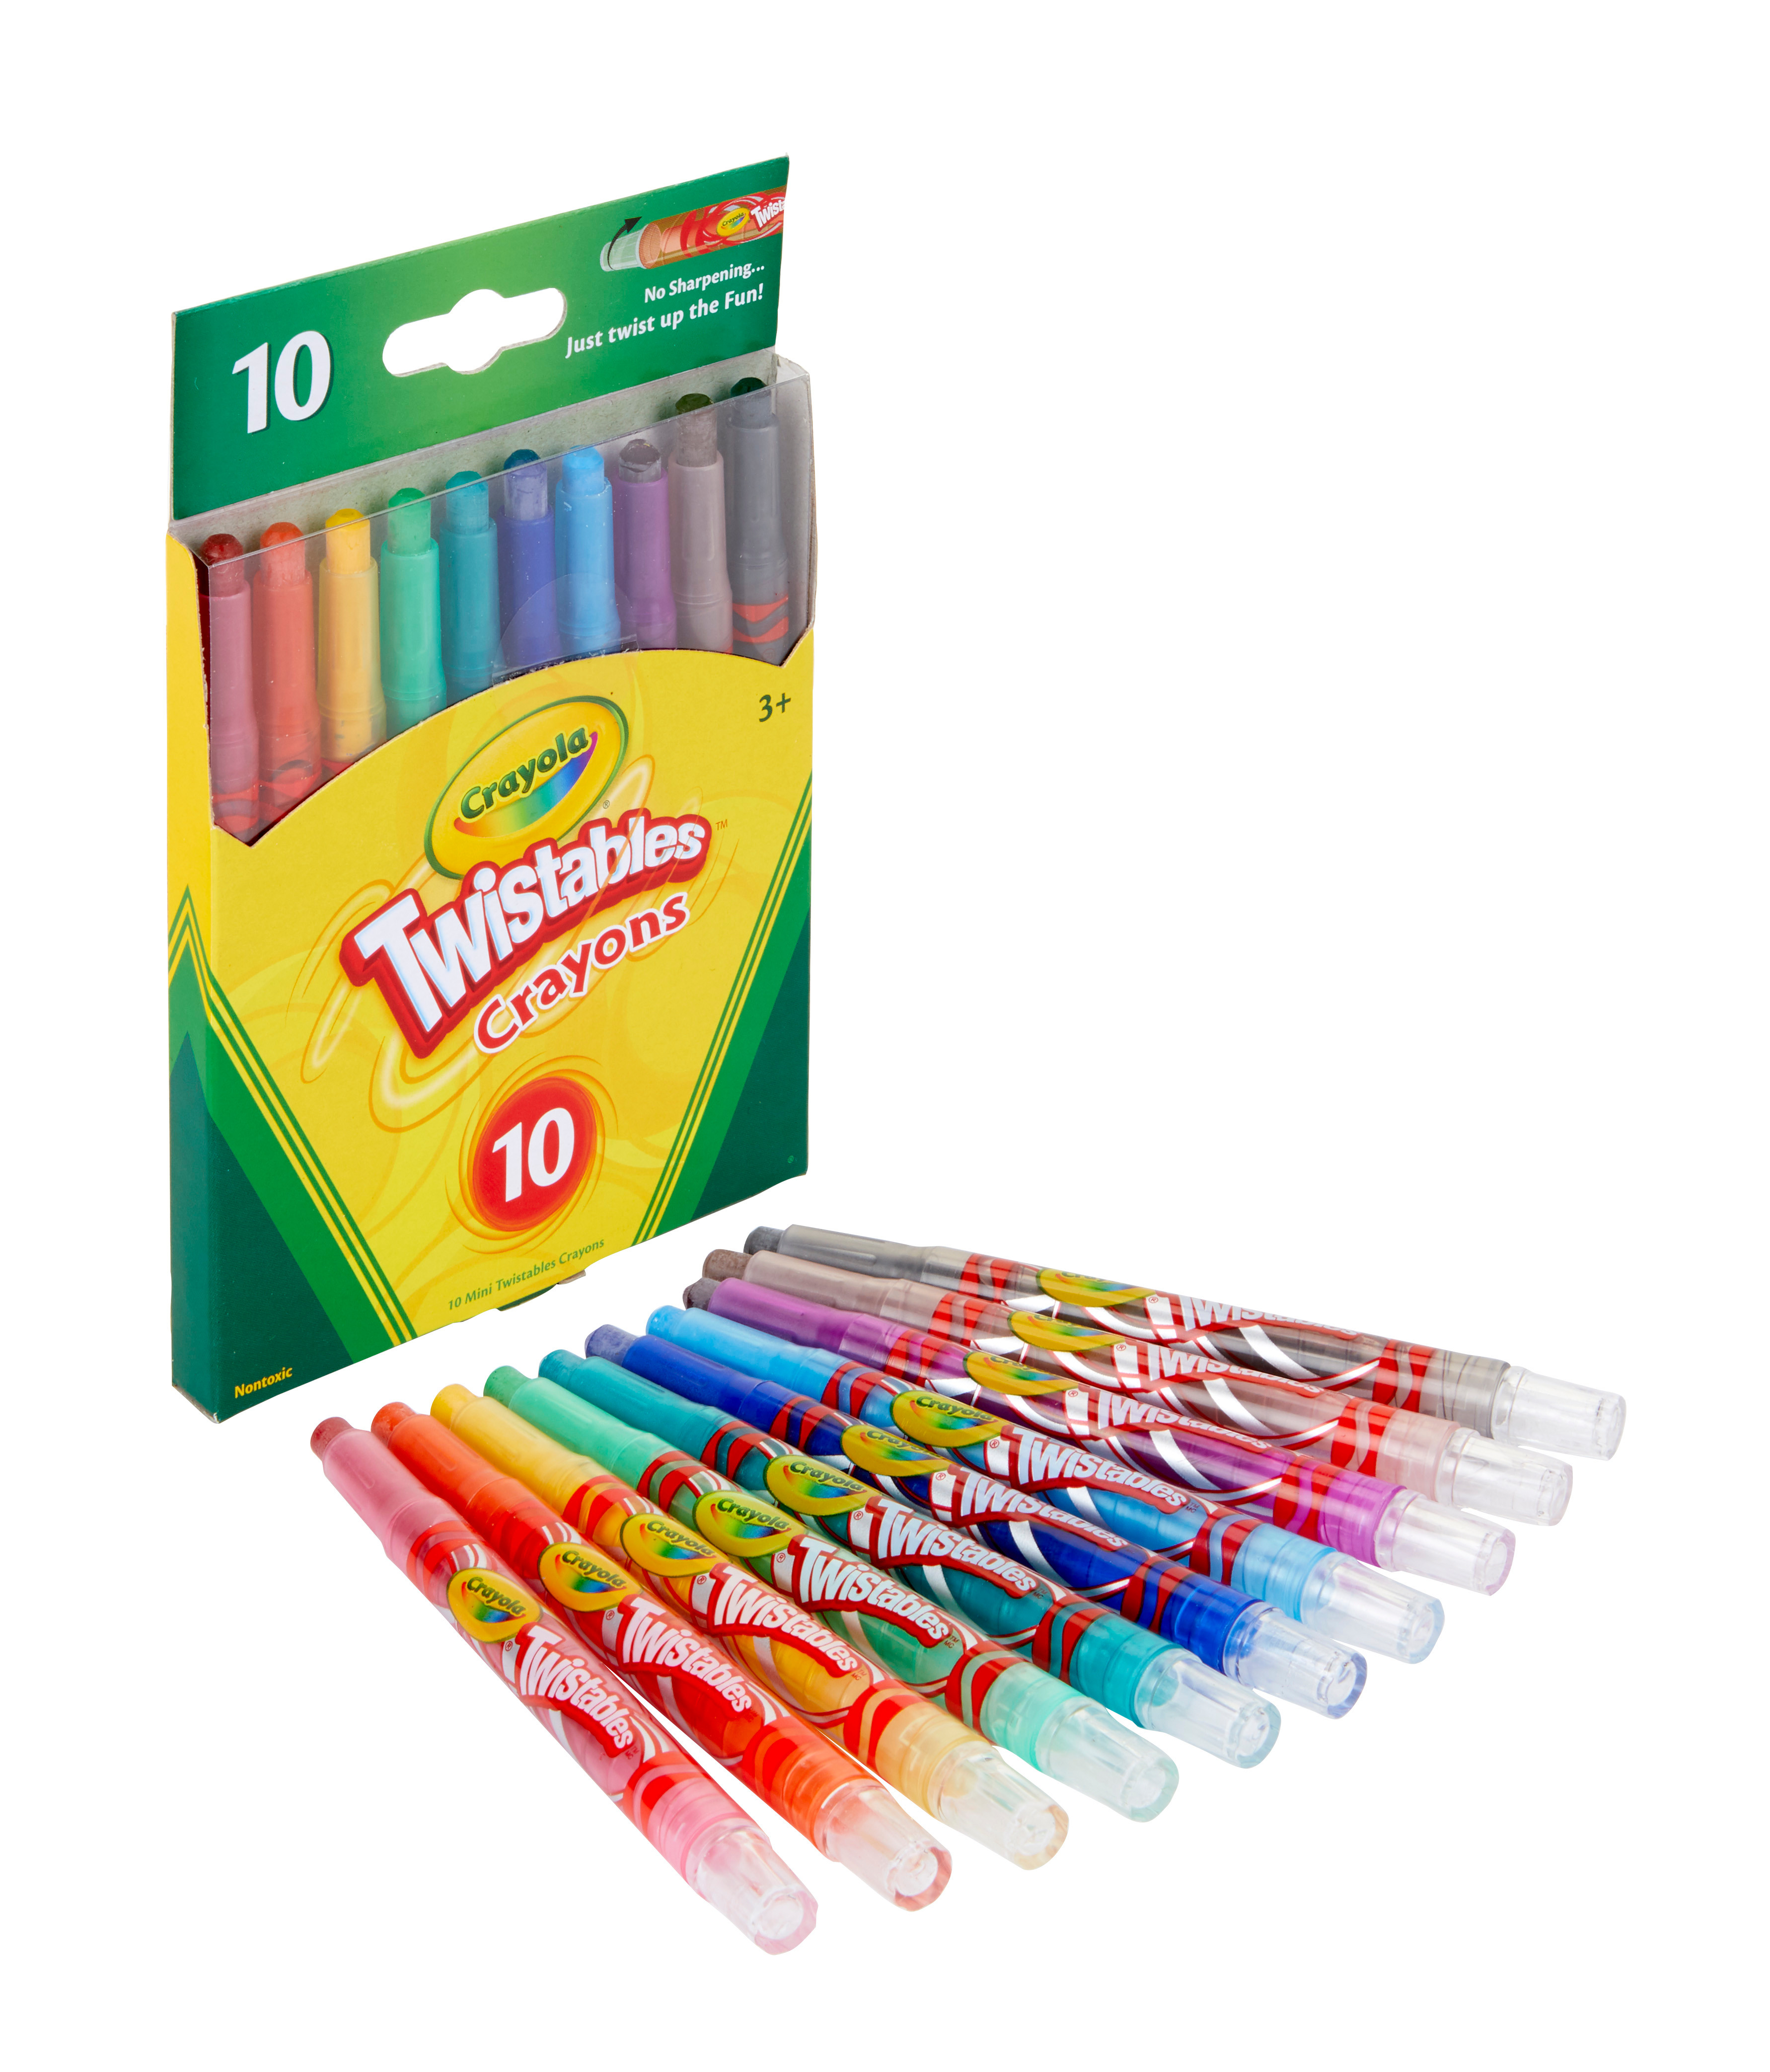 Crayola Mini-Twistables Crayons, 10 Count, Assorted Colors - image 2 of 6